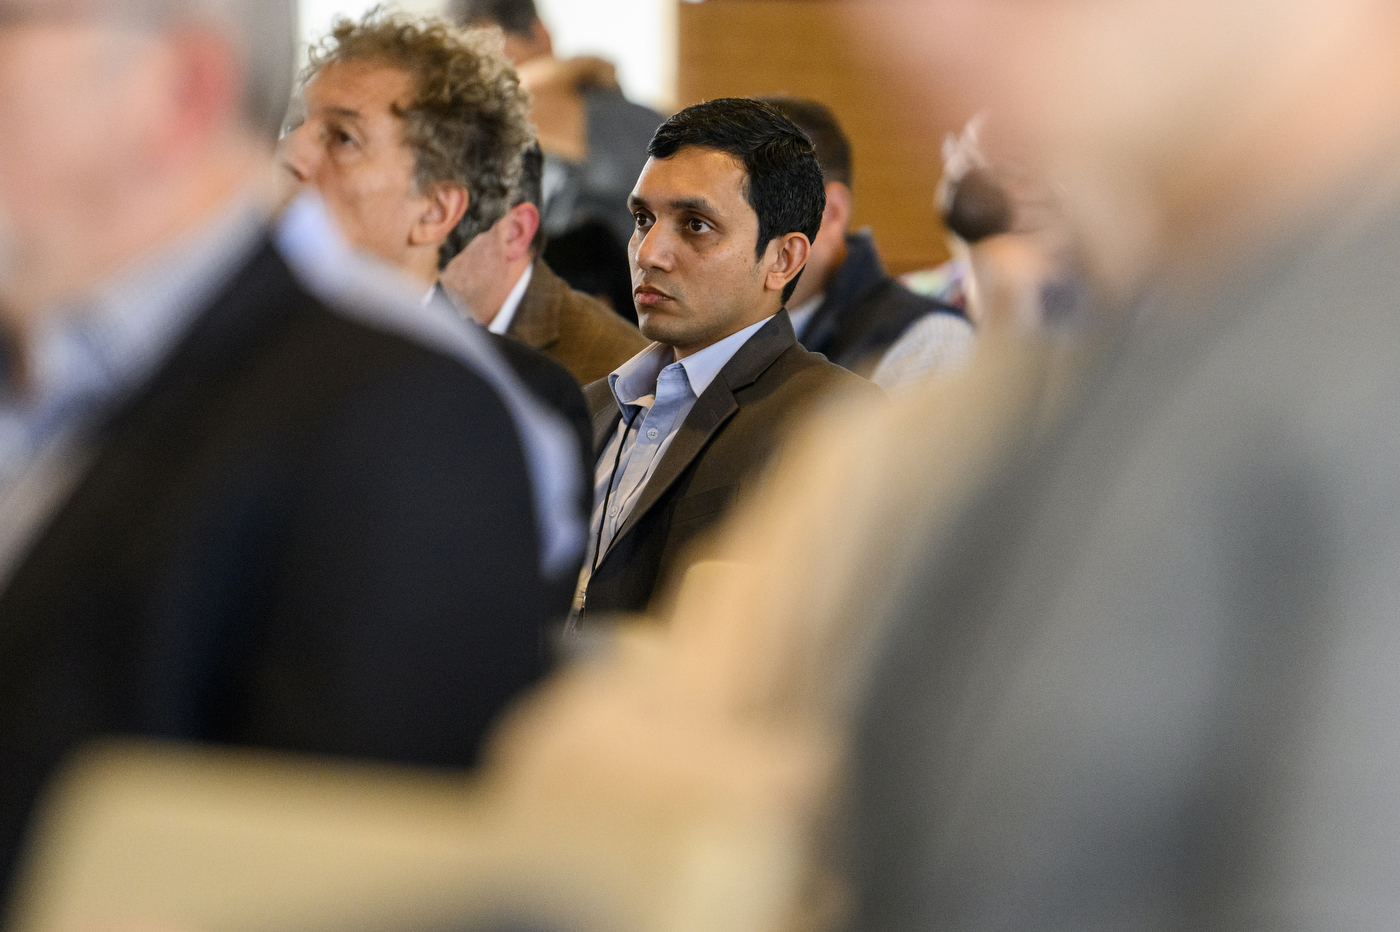 Audience members listening at the AI business conference.